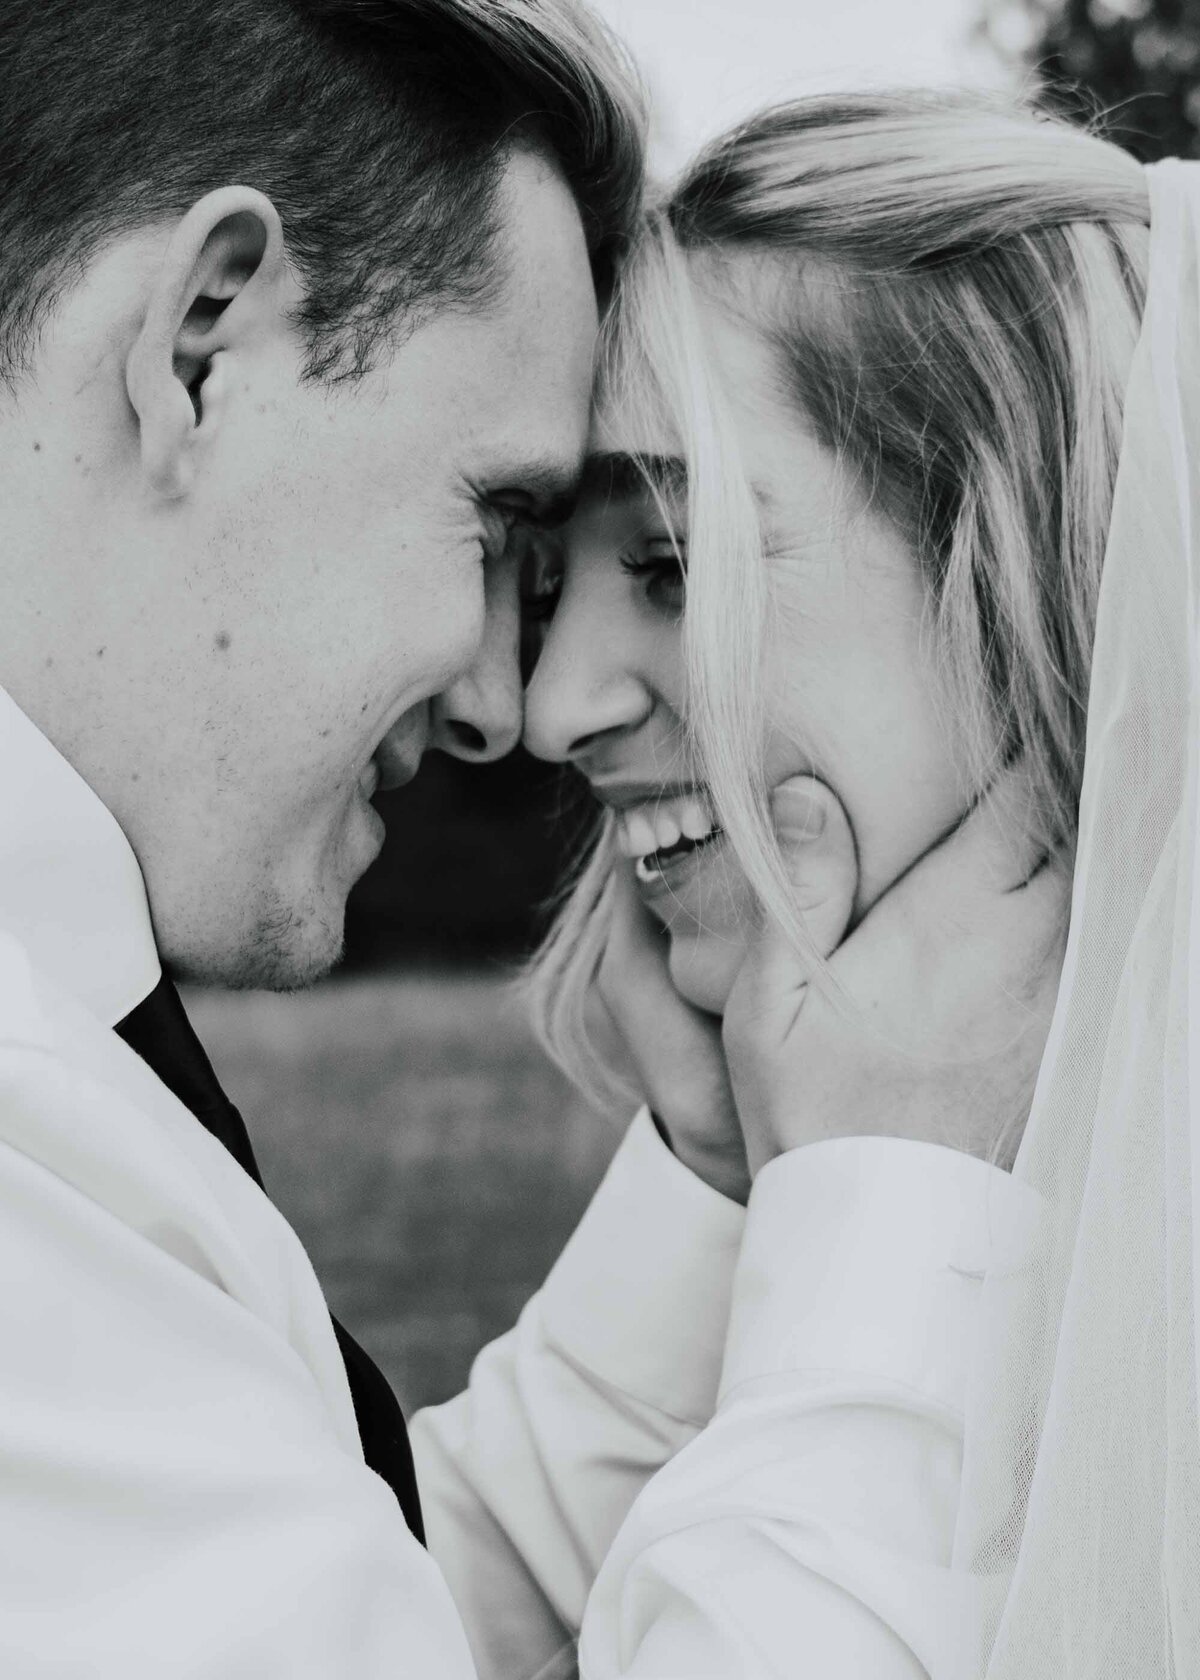 Maddie Rae Photography black and white close u p of bride and groom touching foregeads. his hands are on her face and they are smiling at each other